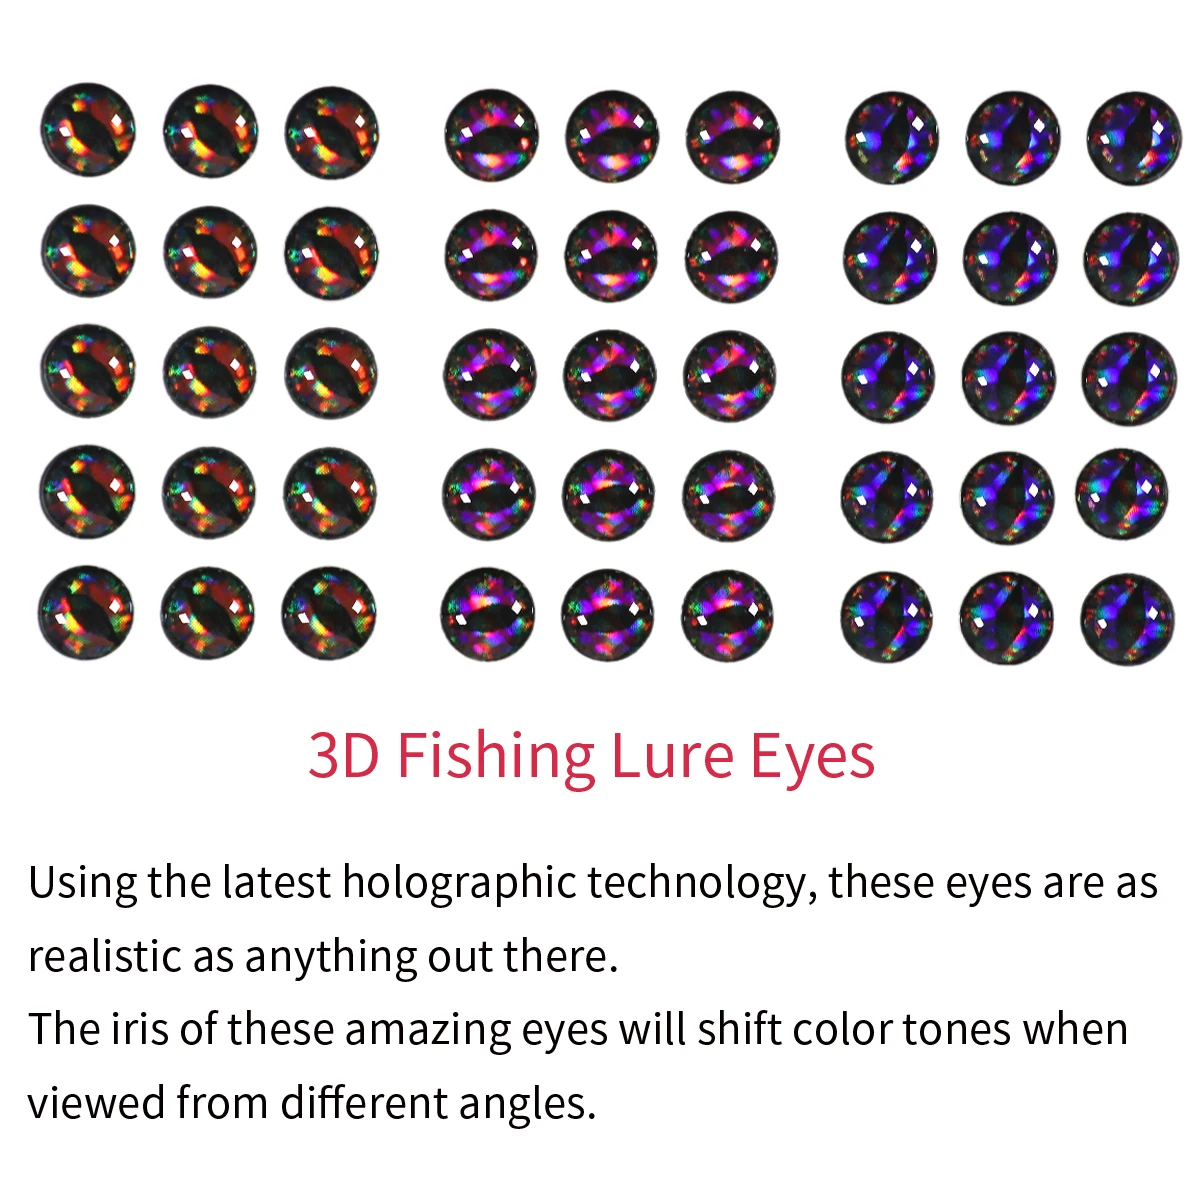 https://ae01.alicdn.com/kf/S642b2a3a95c34395a9caa1fb66575a71z/69pcs-7-8-9-10mm-Epoxy-3D-Simulation-Fish-Eyes-Assorted-Artificial-Laser-Fish-Eyes-For.jpg